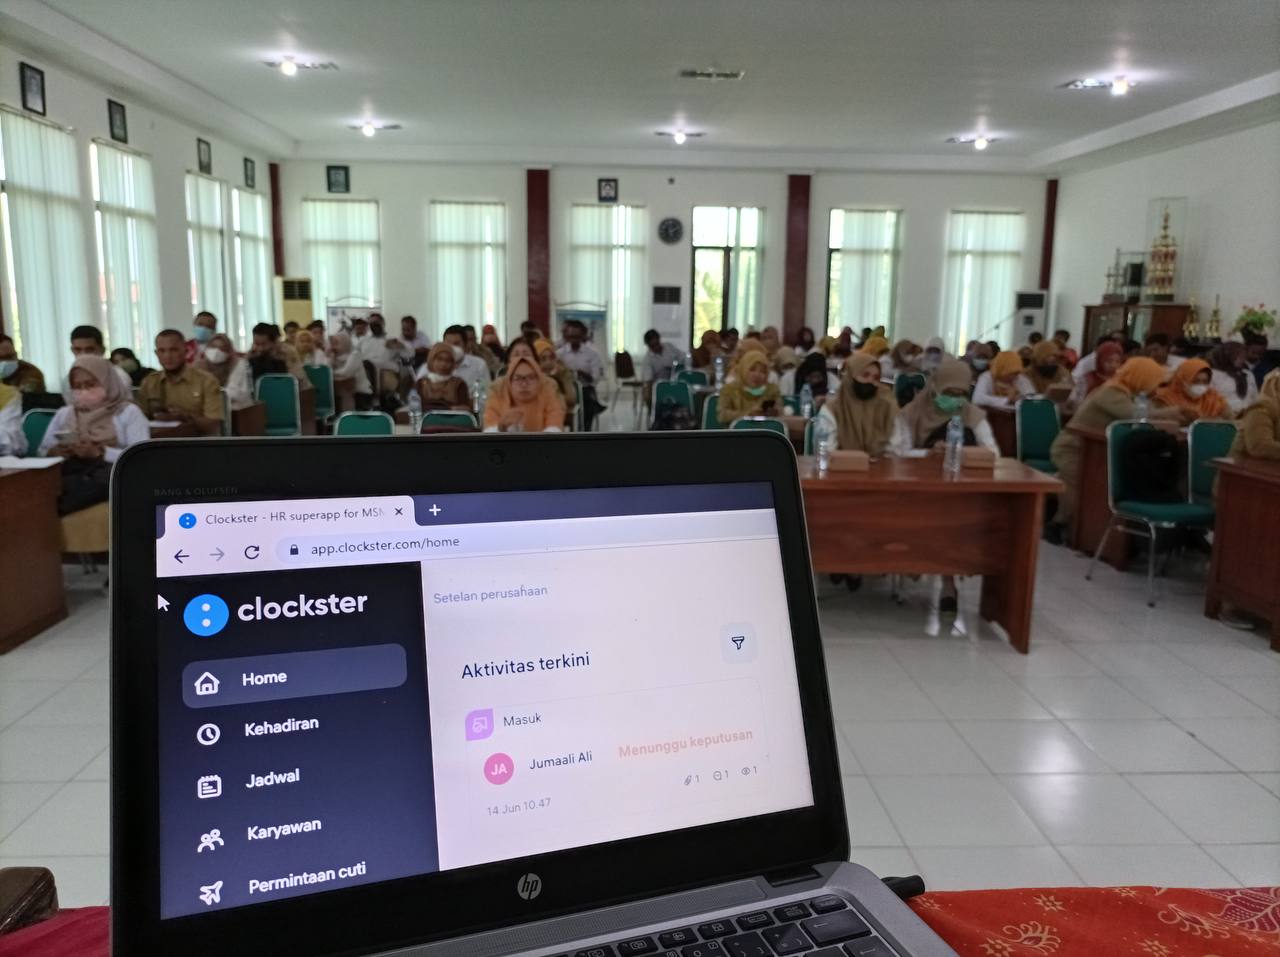 An Indonesian state school learning about Clockster functionality